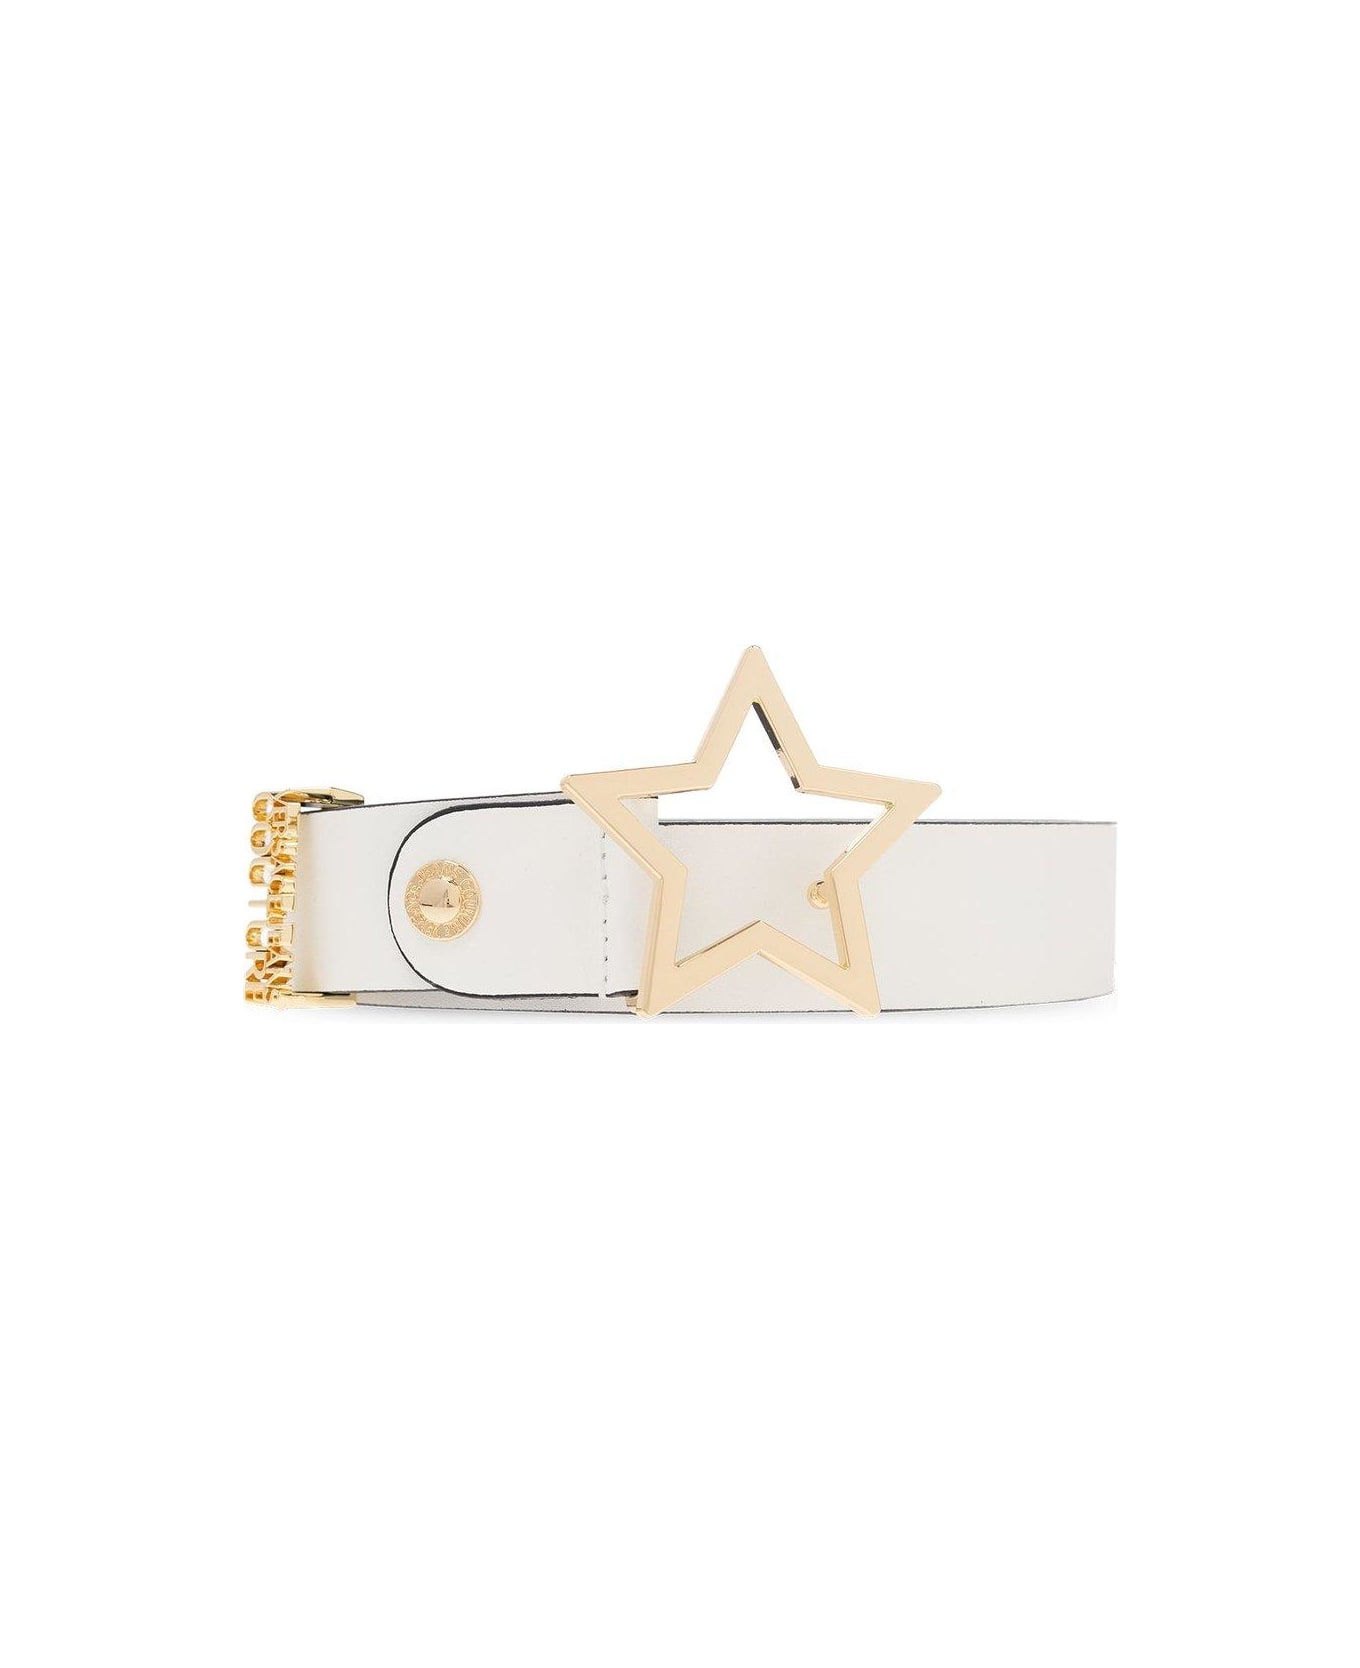 Versace Jeans Couture Logo Lettering Buckle Belt - White